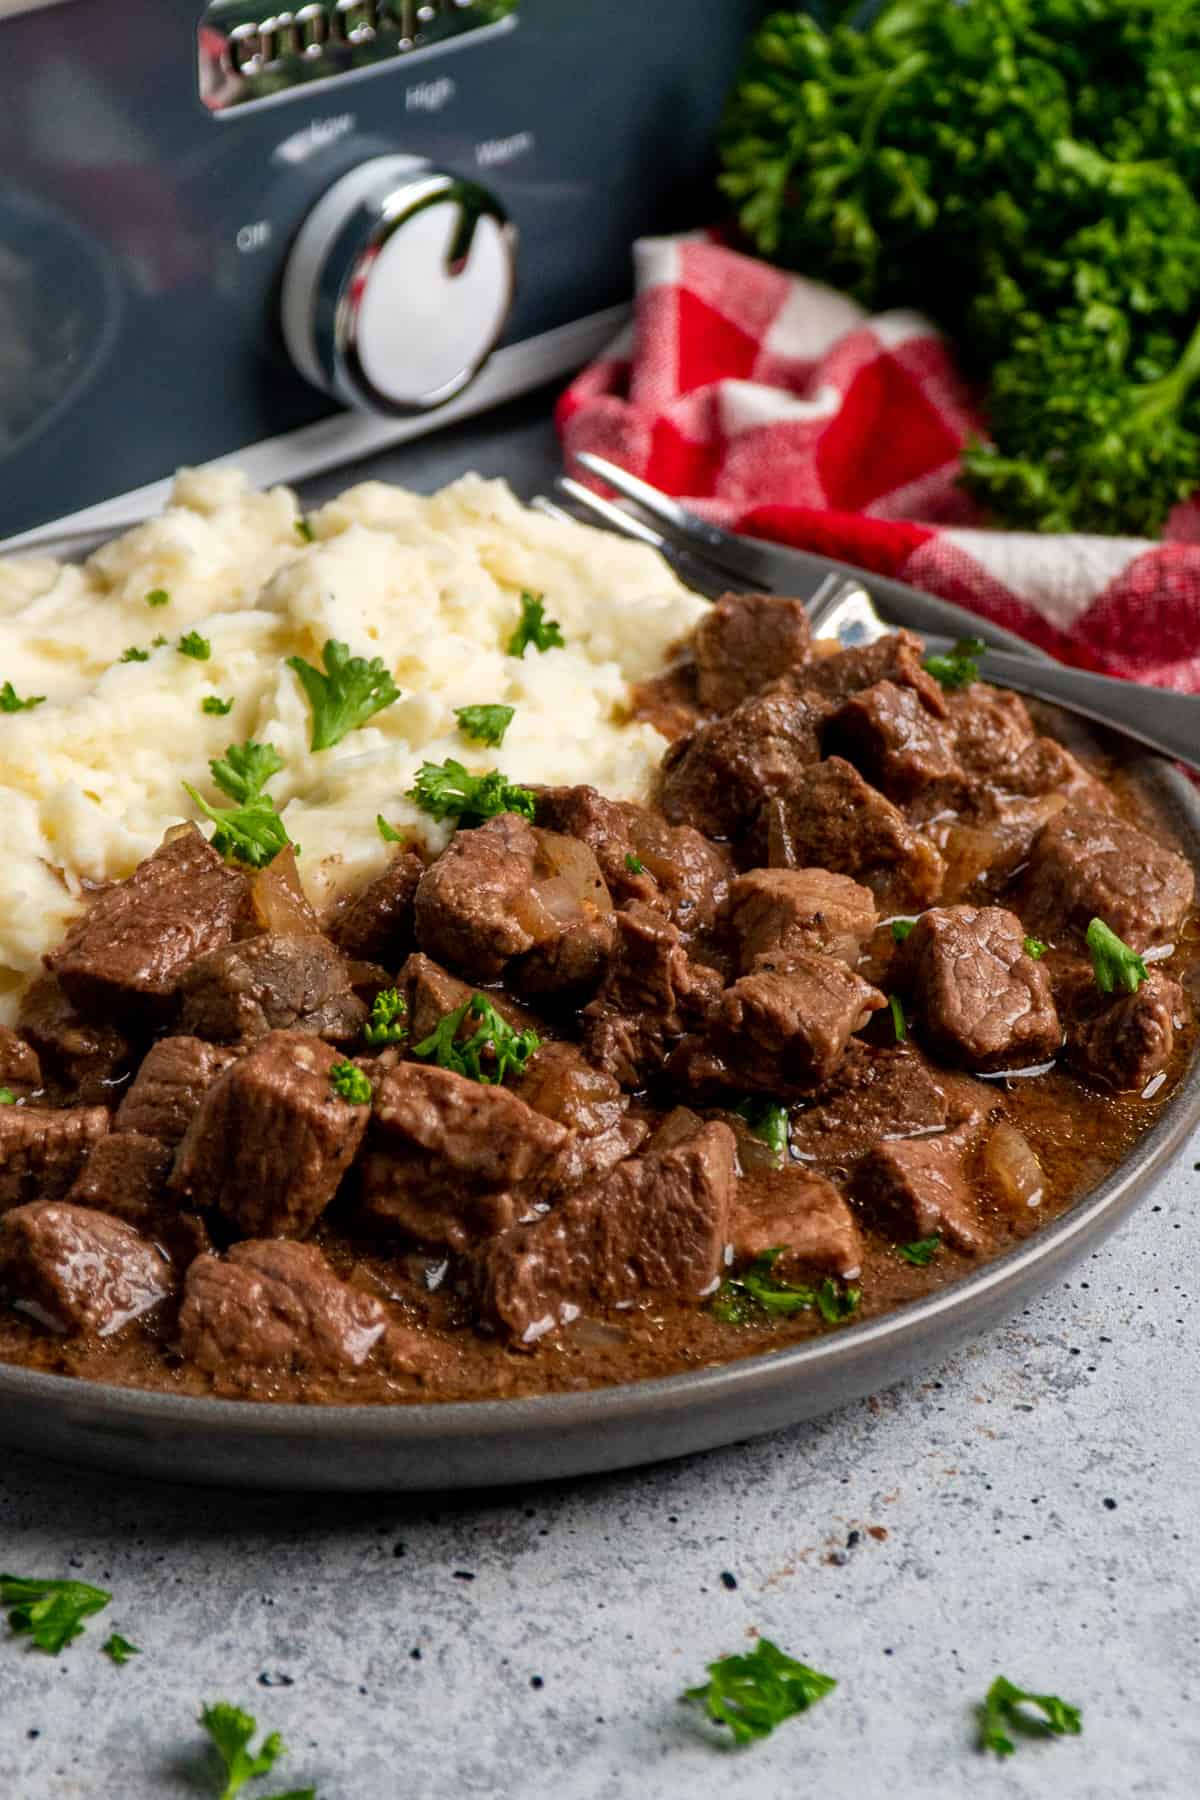 Crock Pot steak bites on a plate with mashed potatoes.